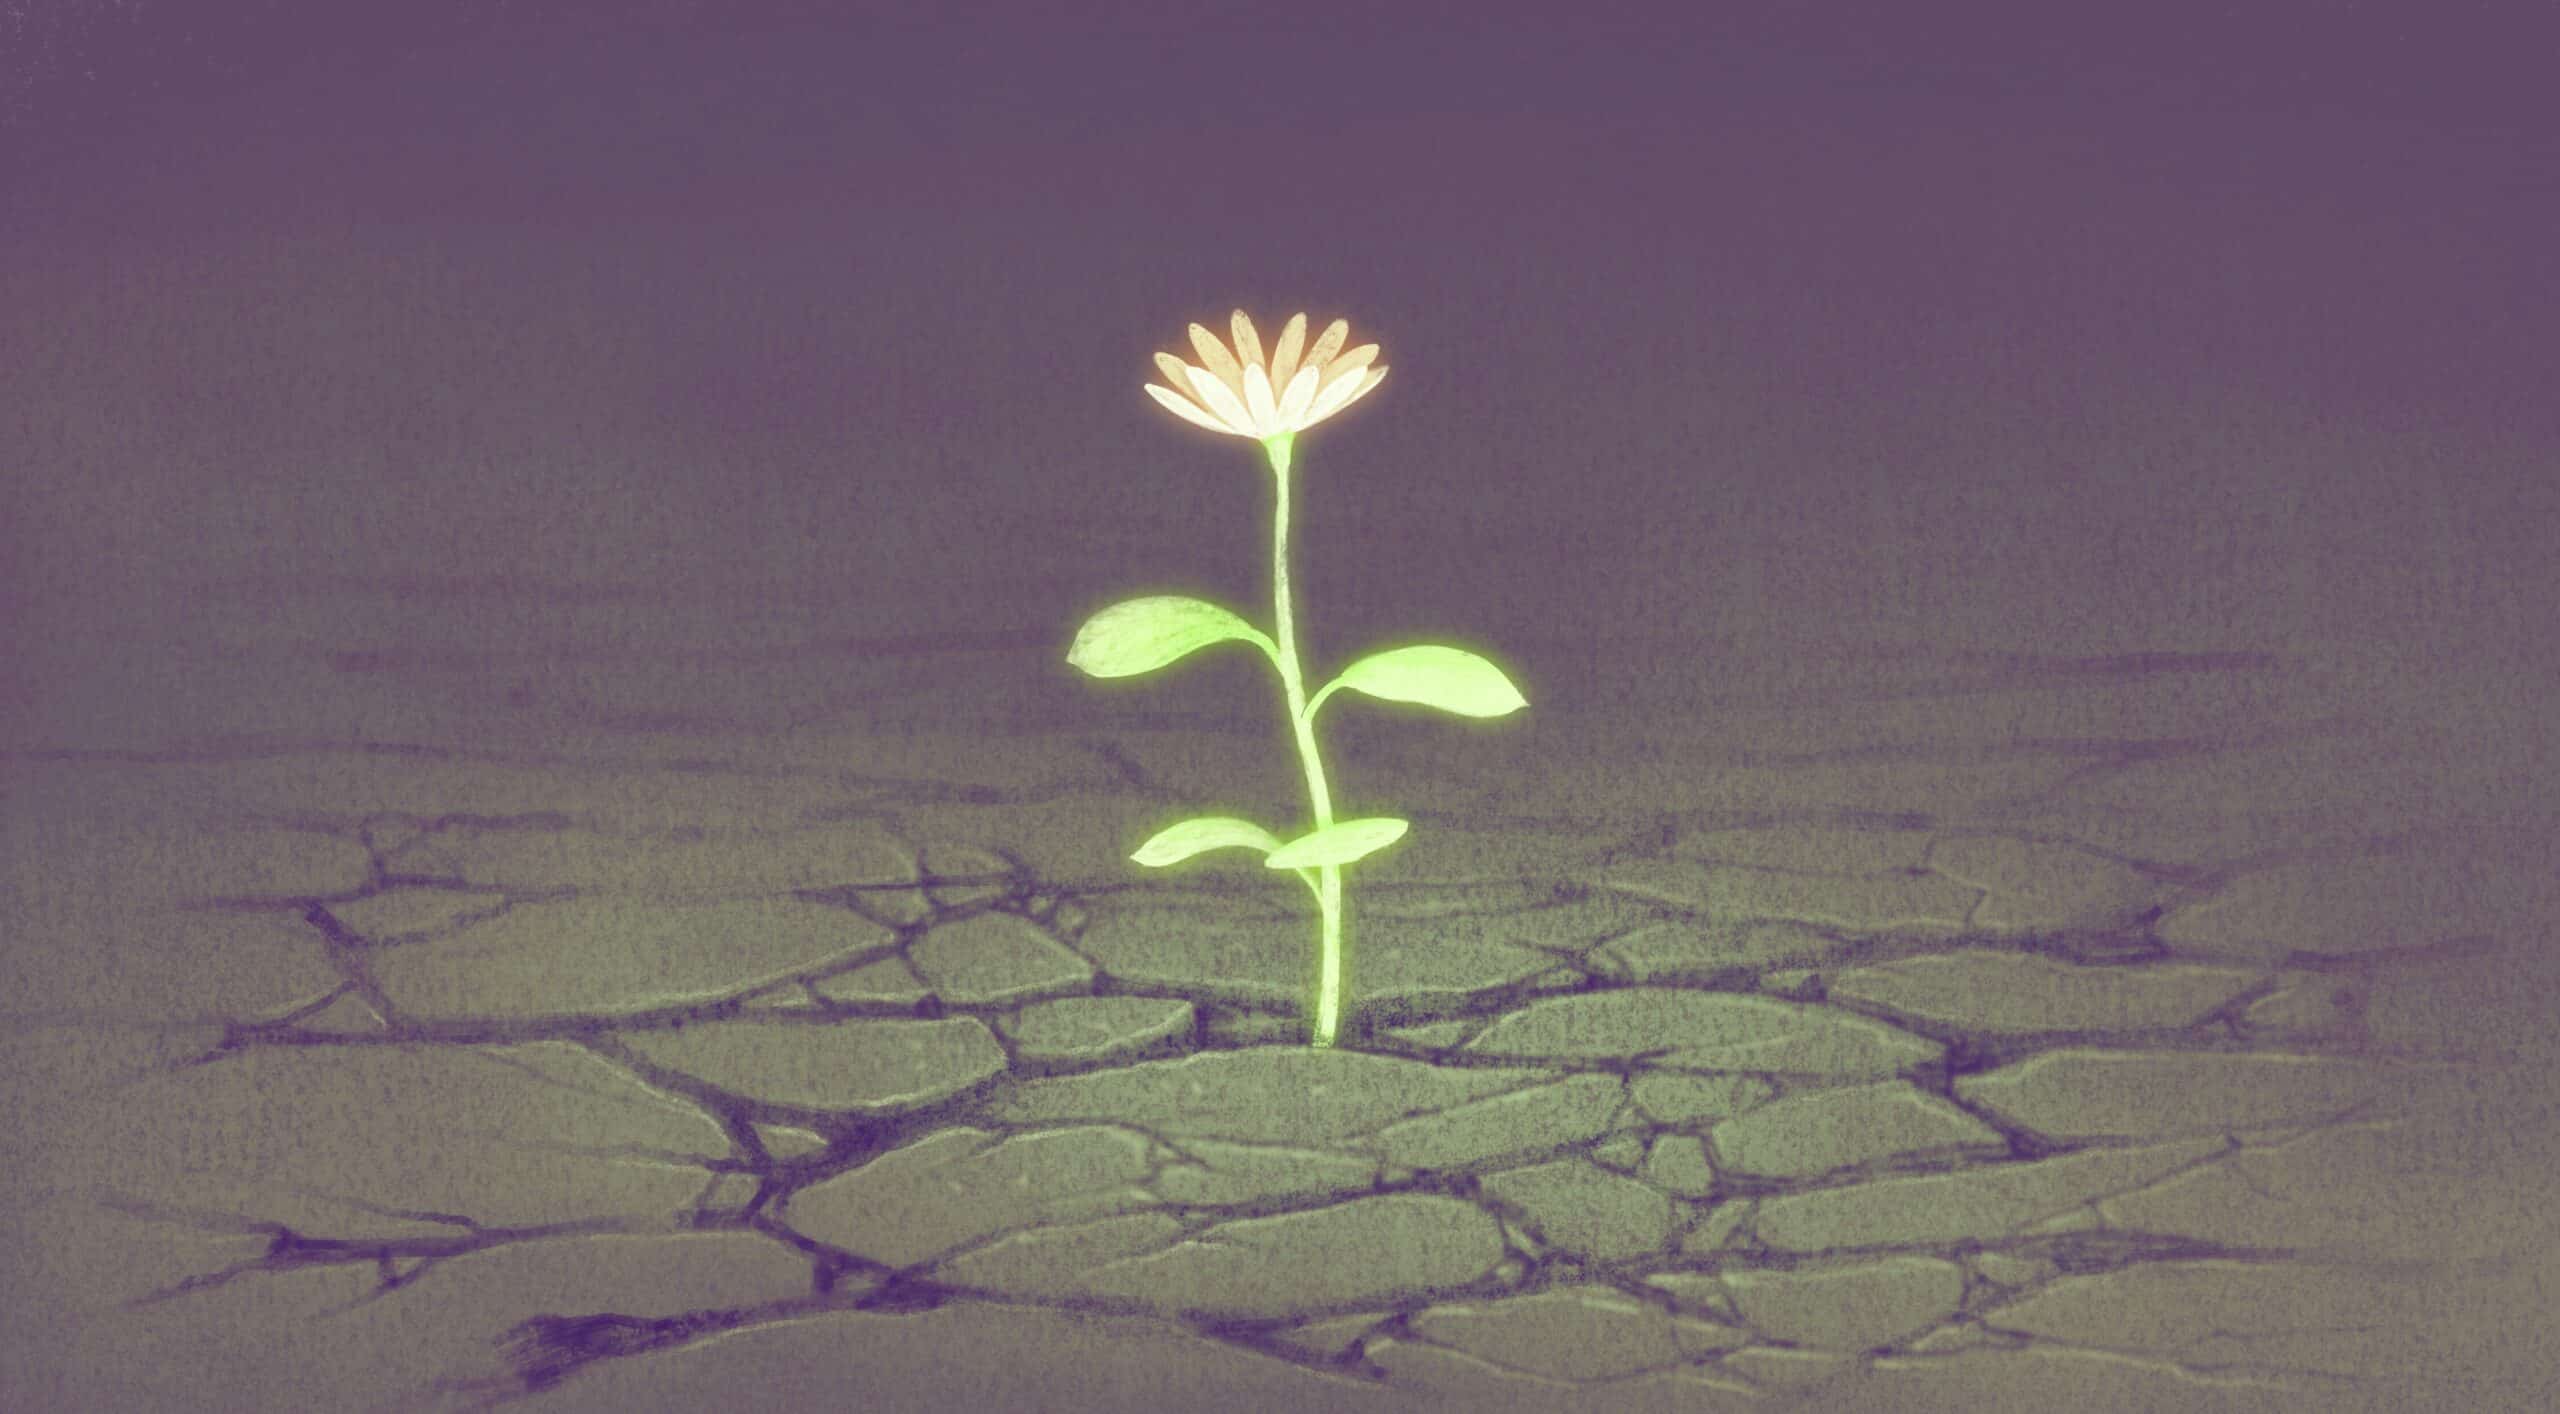 Illustration of pink flower with green leaves growing up through cracked pavement.